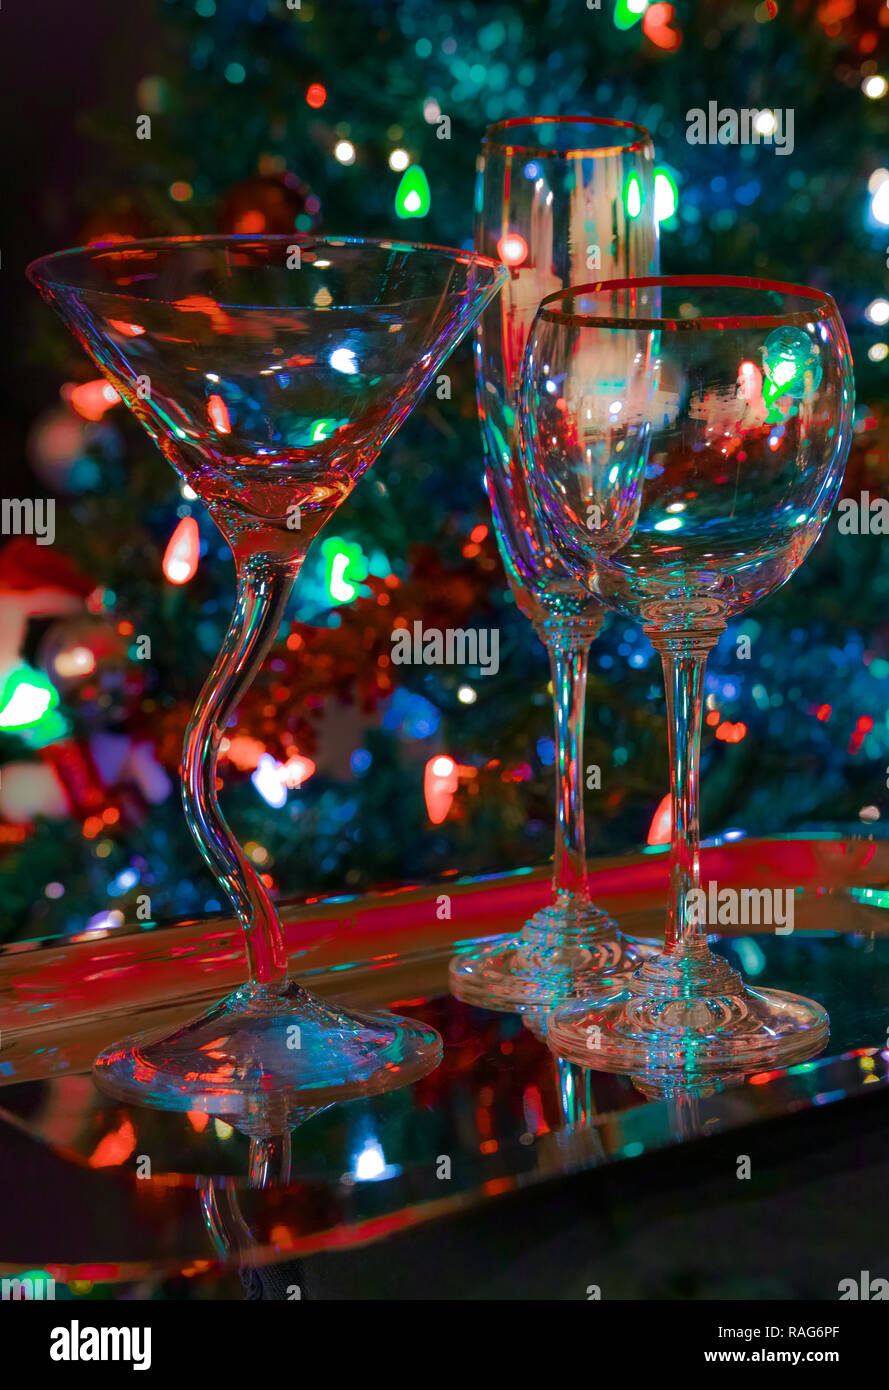 Three different alcohol glasses waiting to be filled. Party ambience and Christmas tree in background. Stock Photo